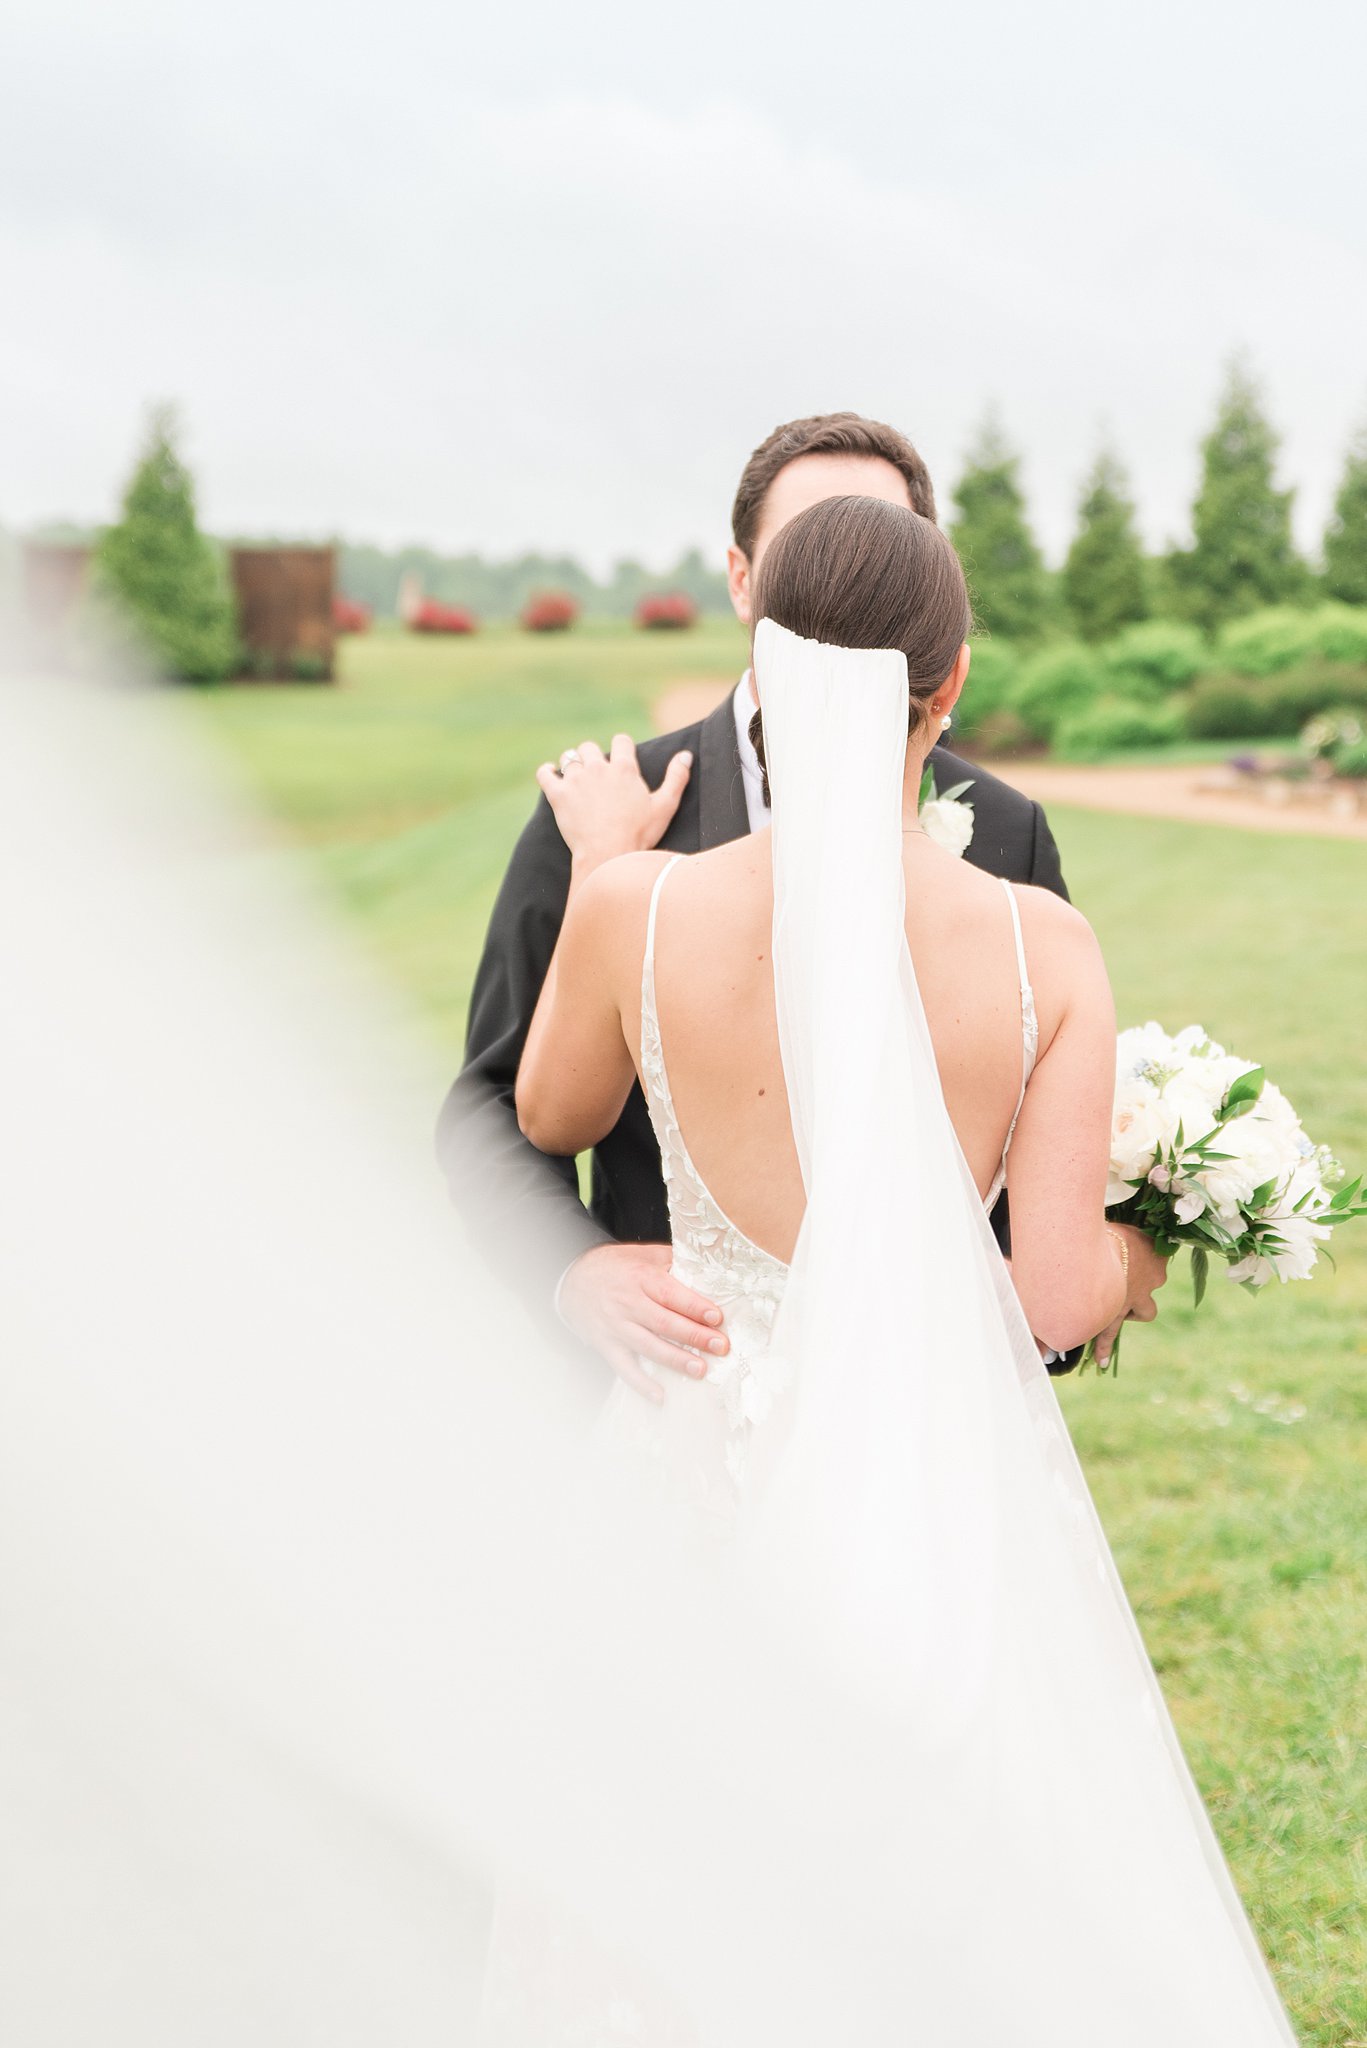 Newlyweds stand in an open lawn holding each other while the vail flies behind the bride